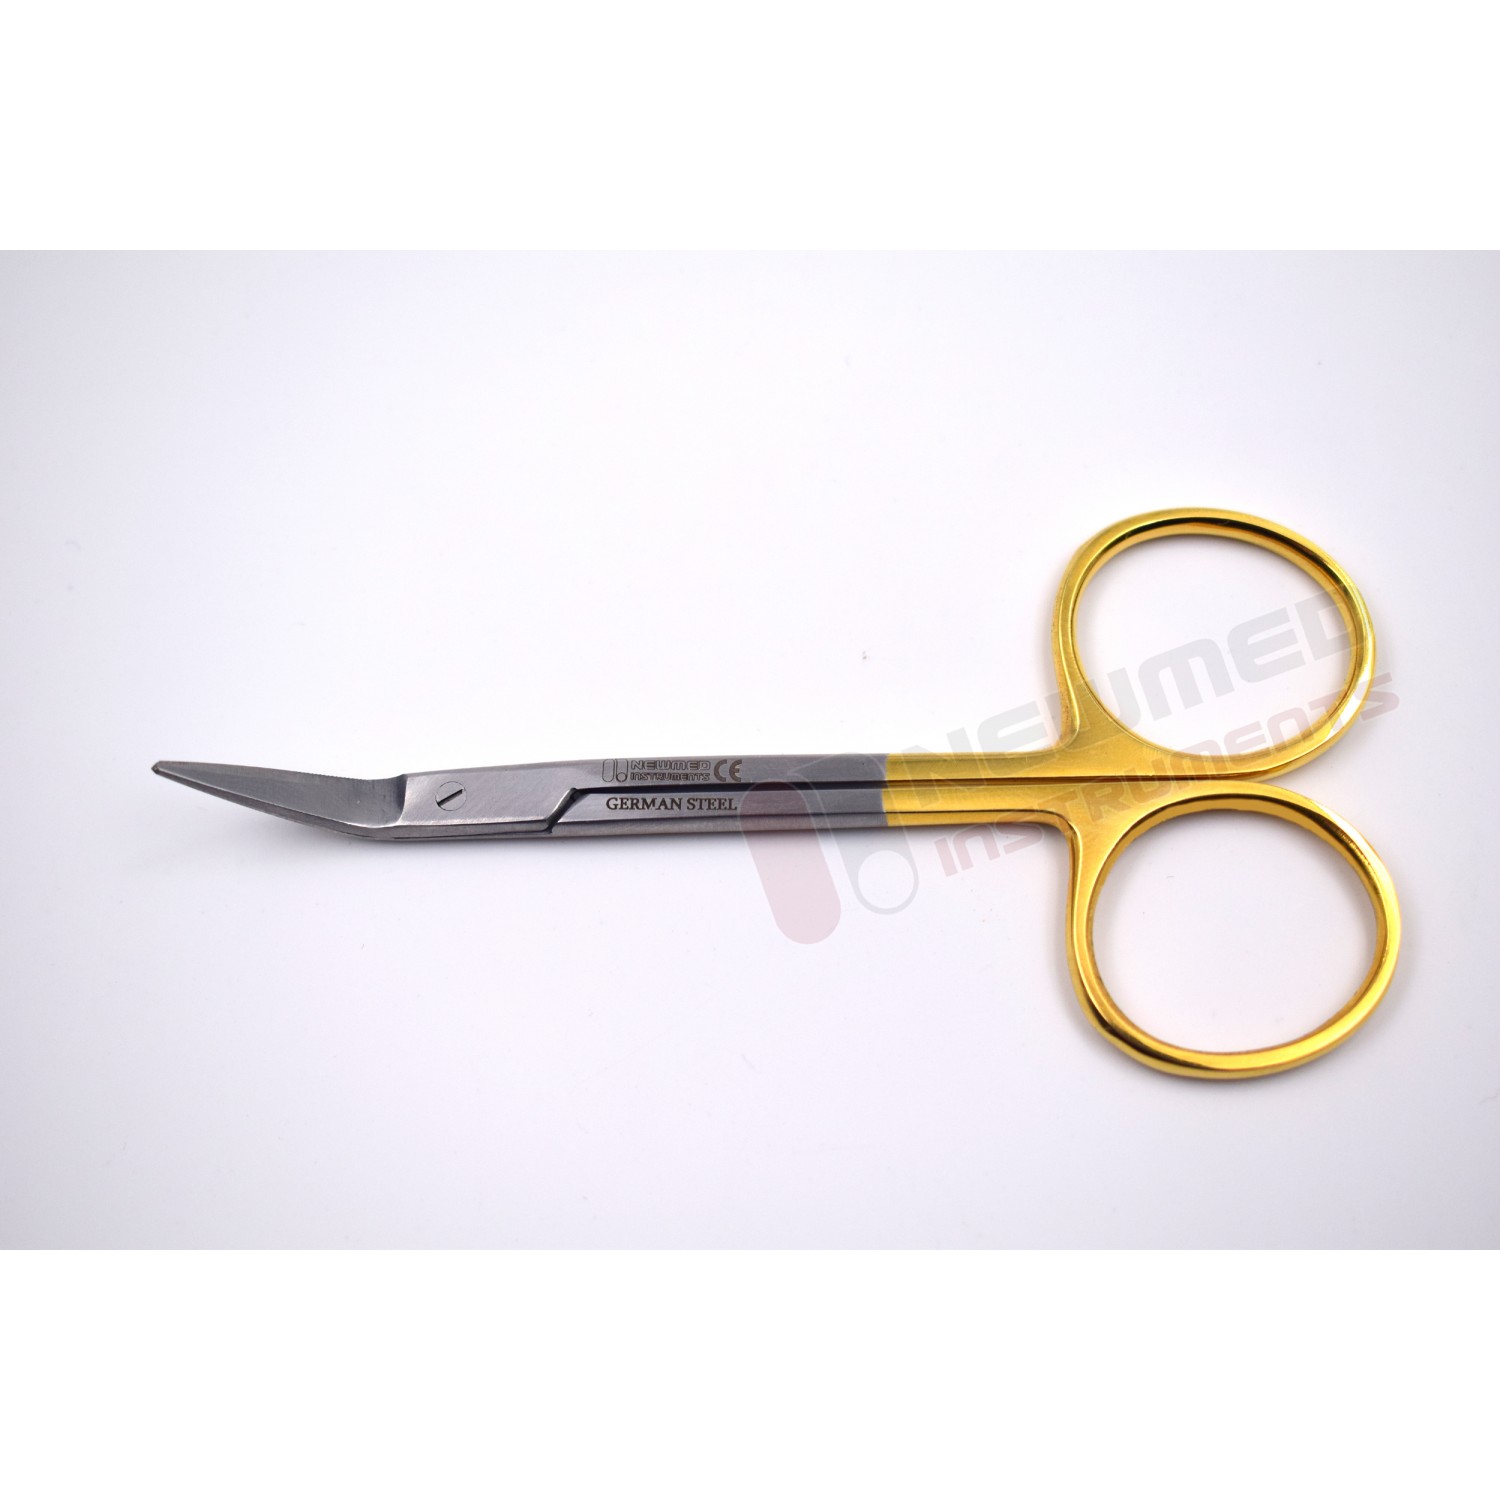 Heavy Duty Blunt Nose KEVLAR® Scissors / Cutters ***MADE IN THE USA!***